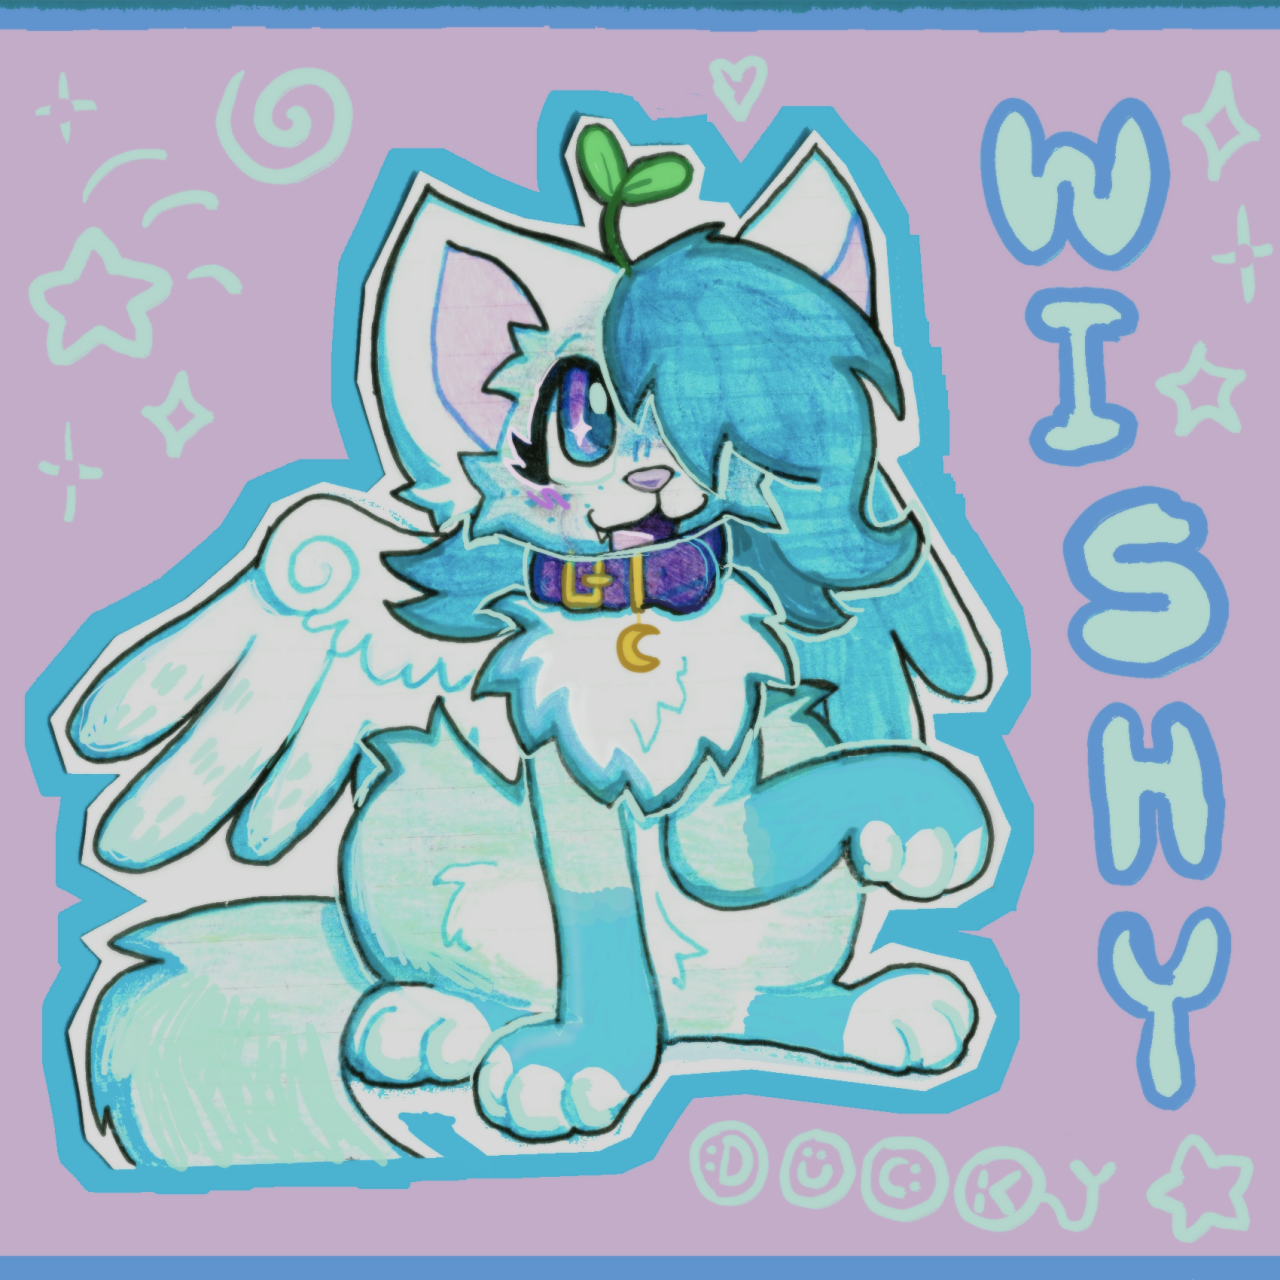 Multimedia artwork of a blue winged kitty with sparkly eyes! Its fur is a warm, light blue with white points and darker blue accents and hair. It also has a little plant sprouting from the top of its head and is wearing a purple collar with a moon charm.